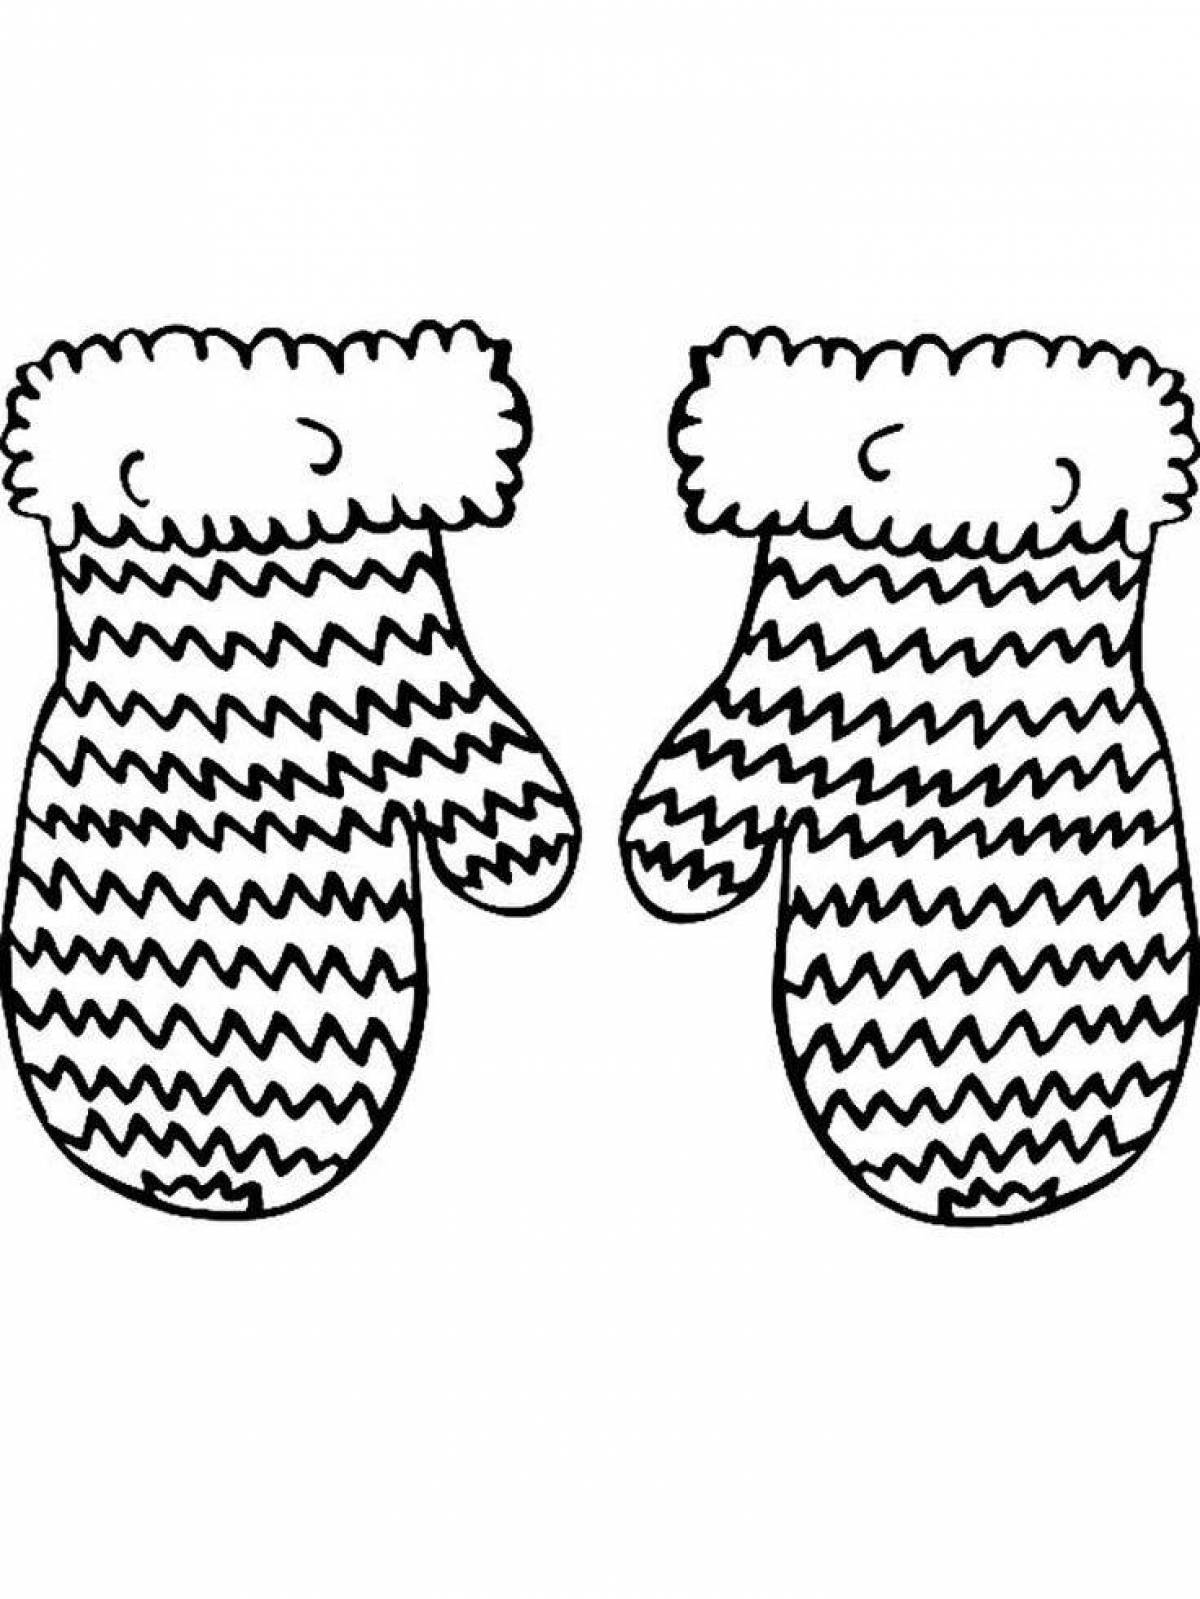 Glorious mittens coloring book for kids